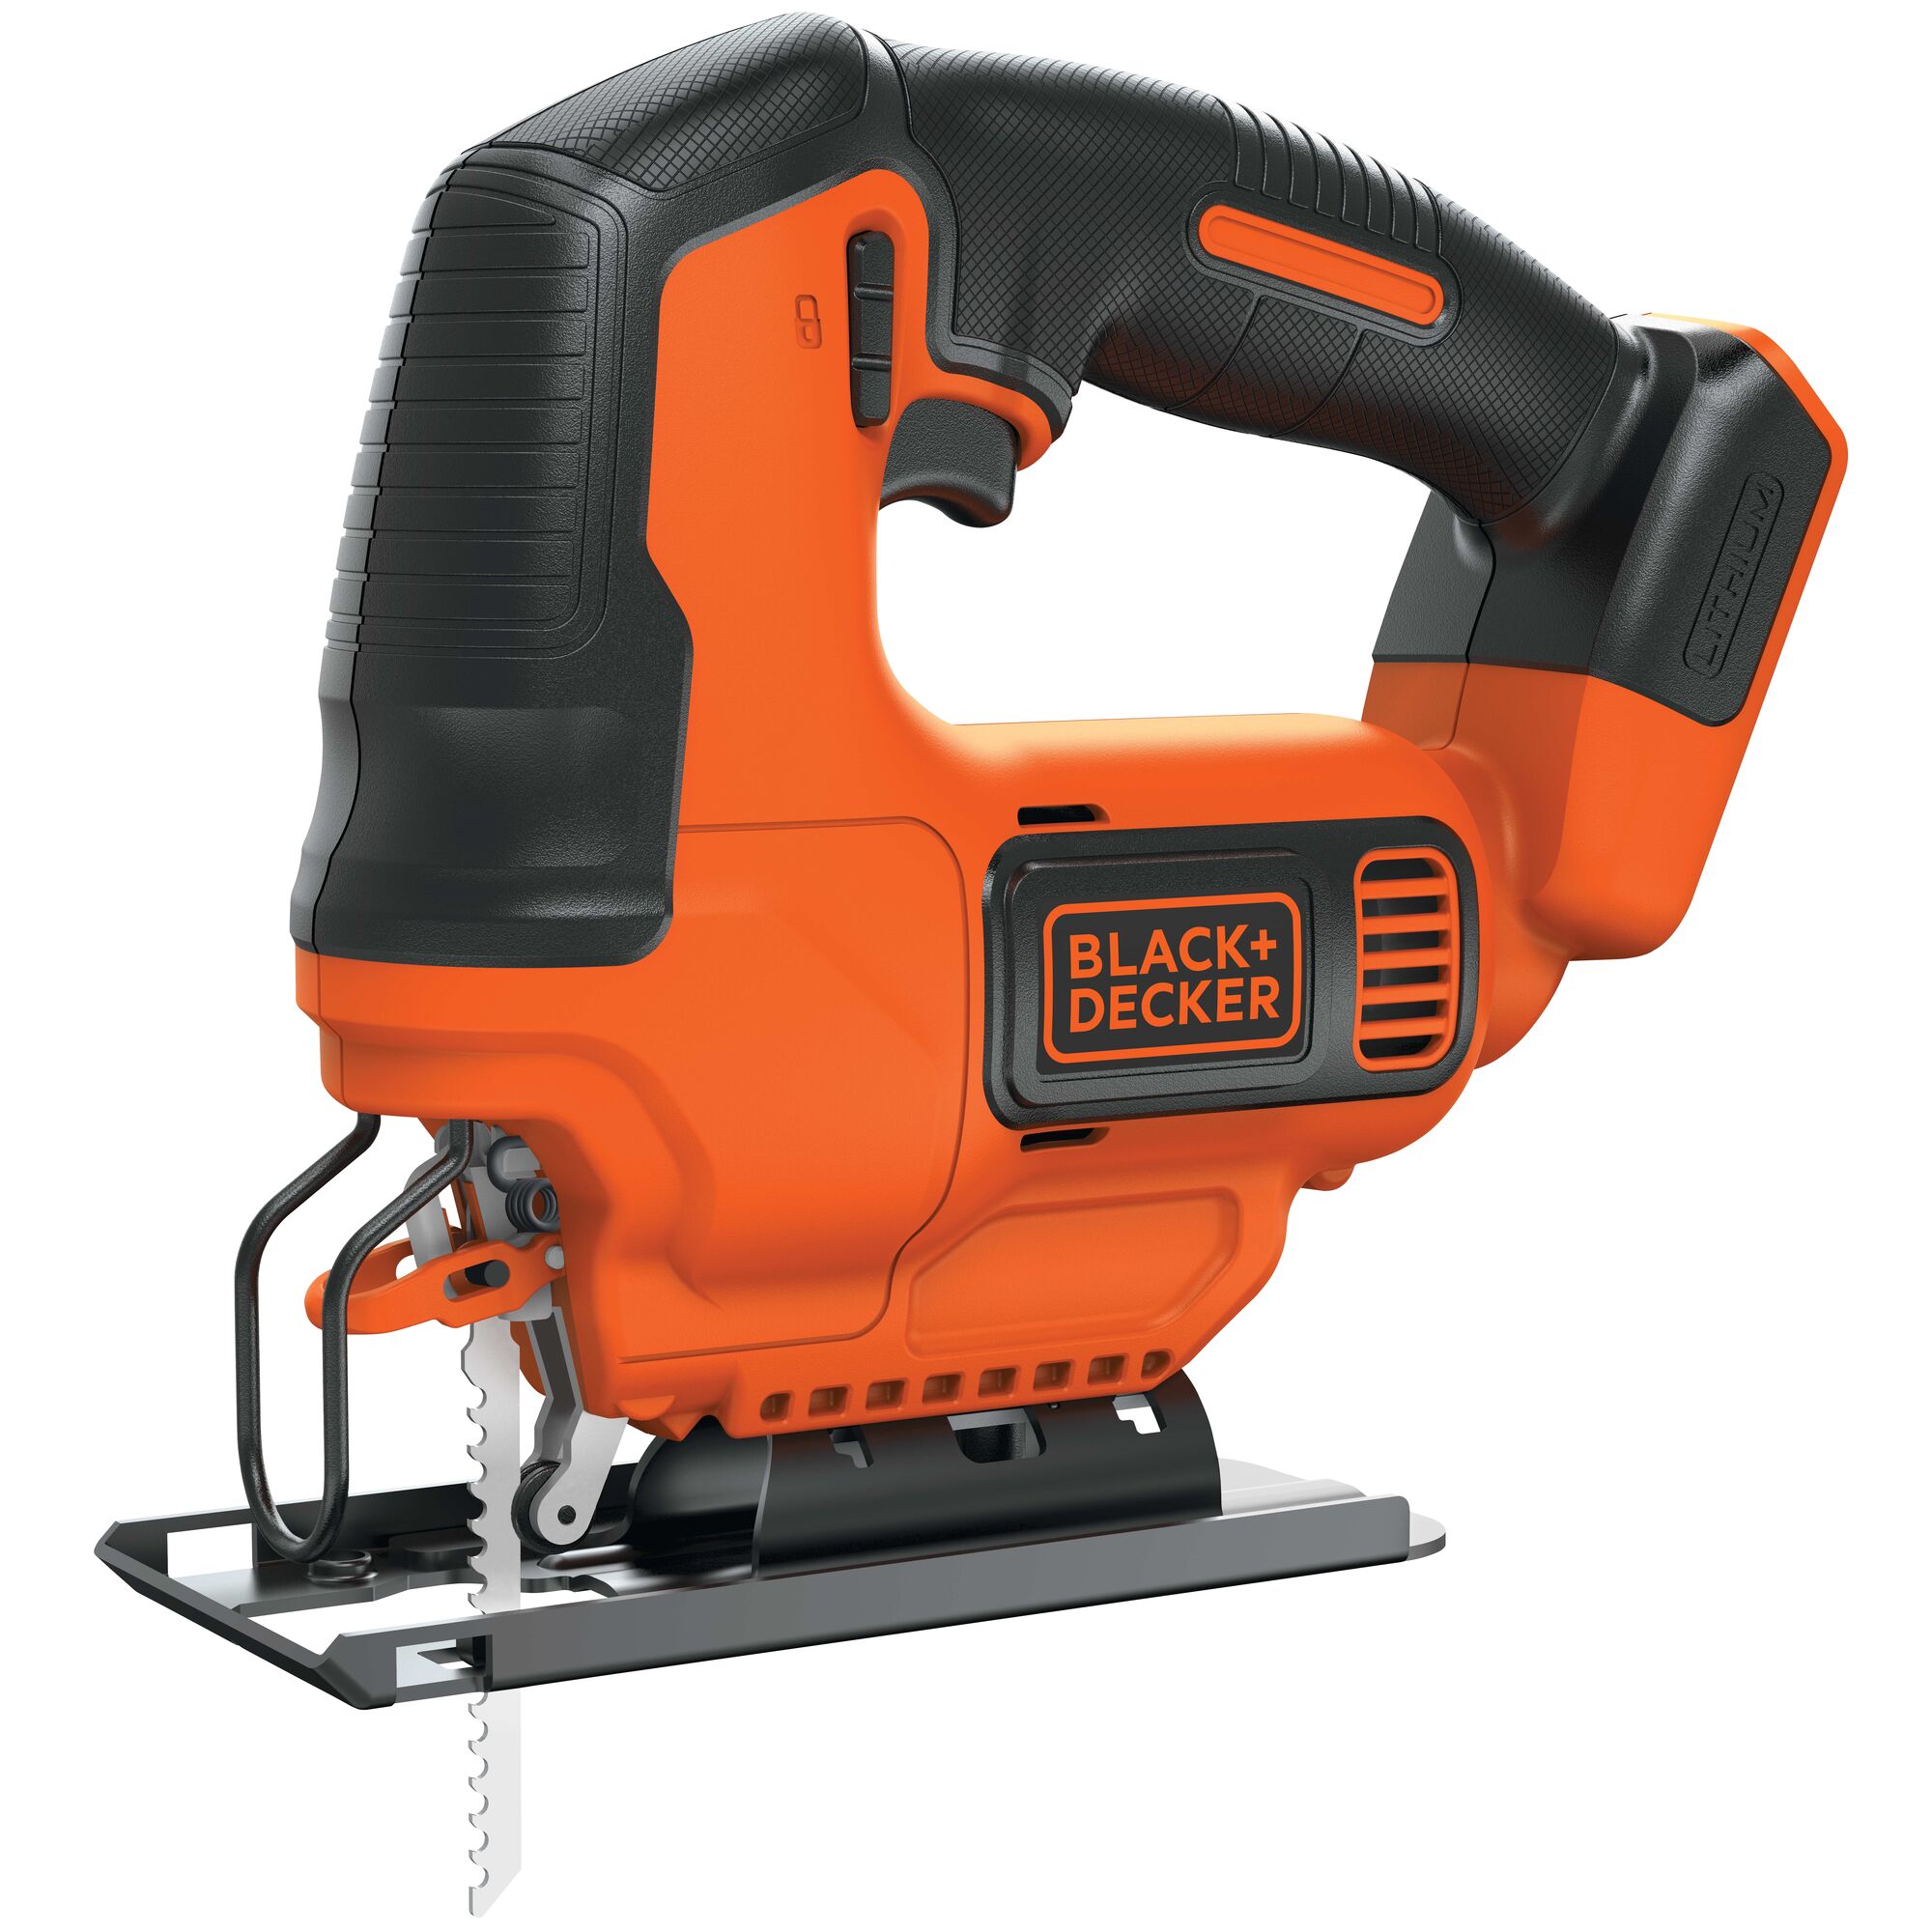 Profile of 20 volt cordless jigsaw, tool only.